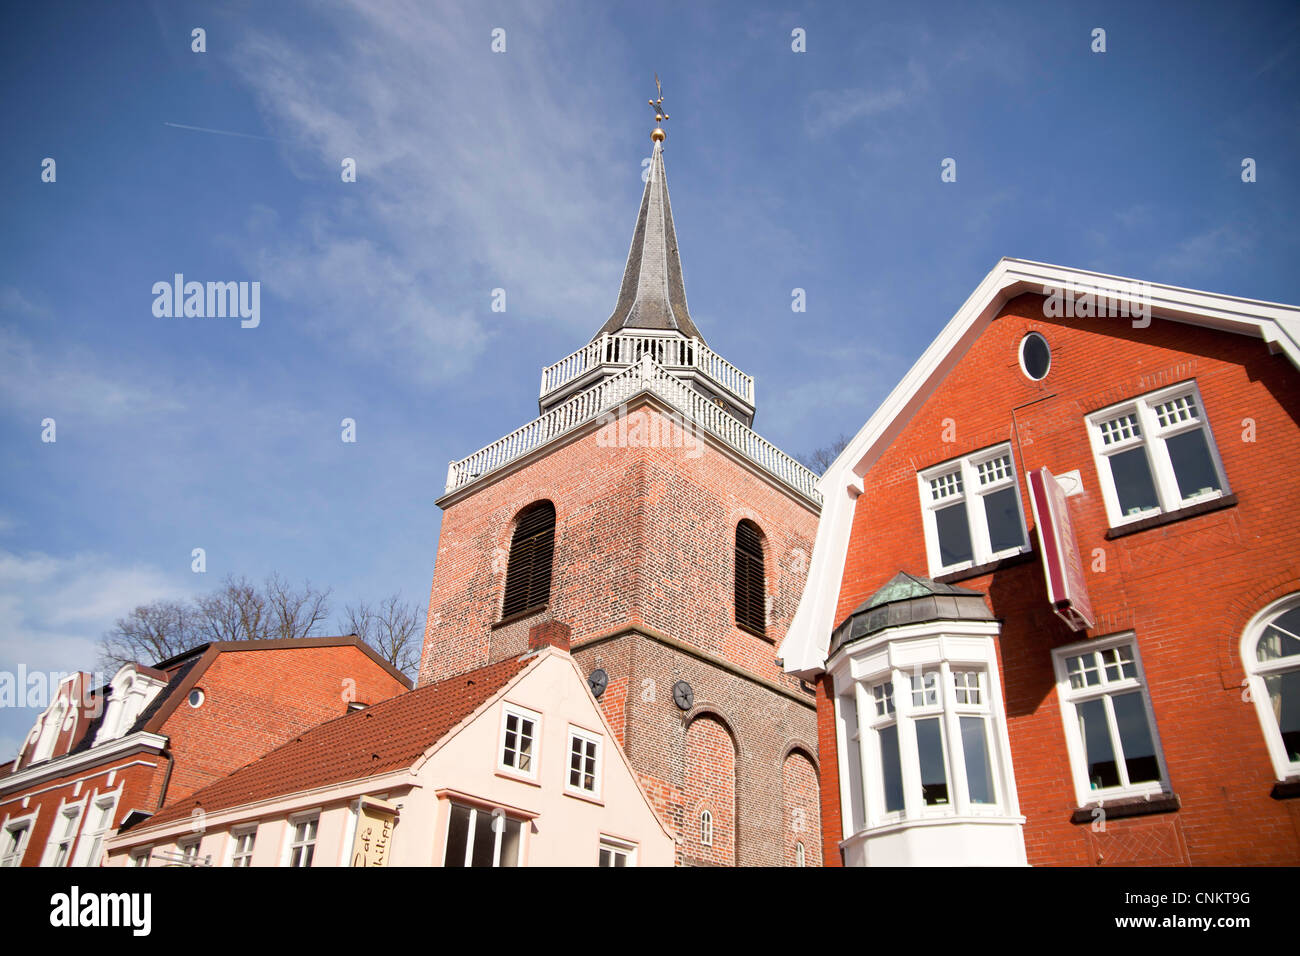 tower of Lamberti church in Aurich, East Frisia, Lower Saxony, Germany Stock Photo